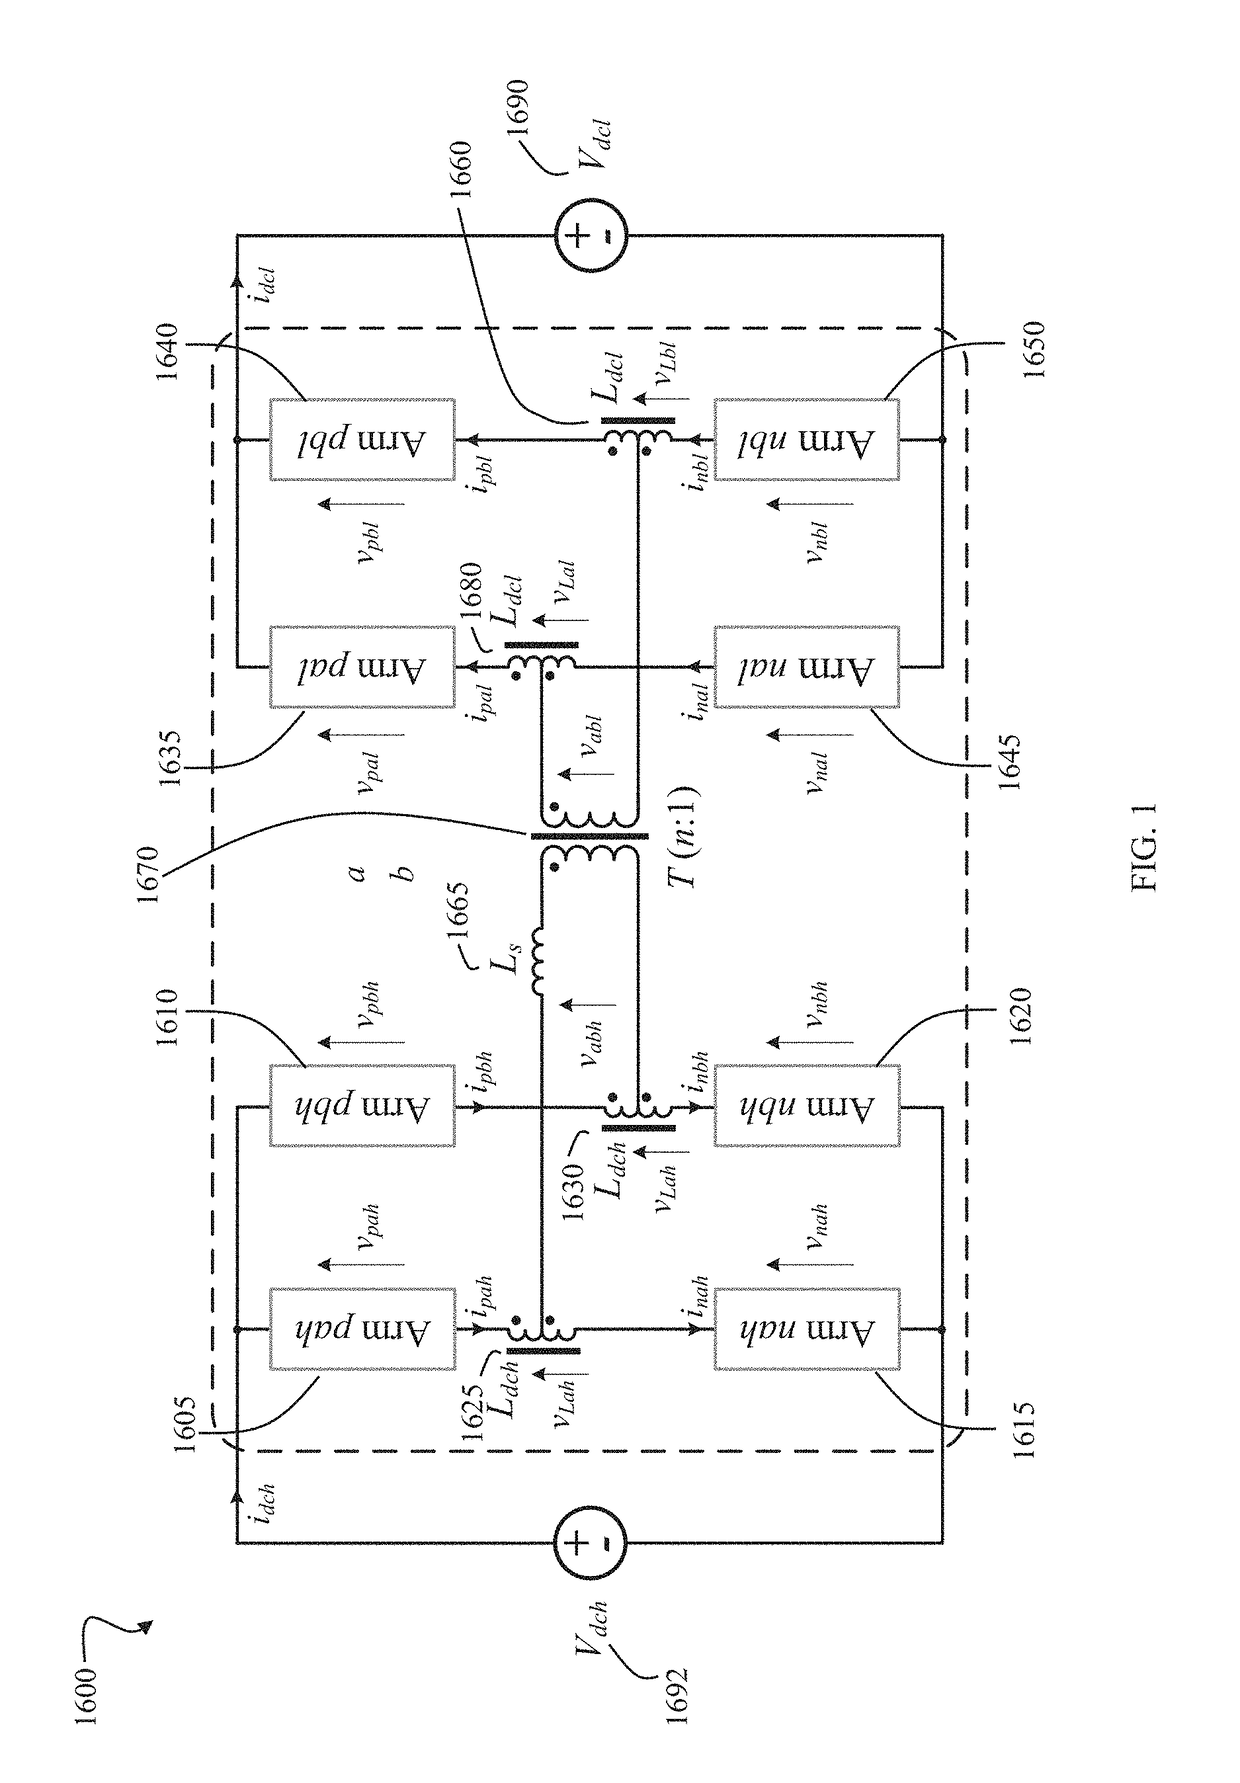 Modular multilevel DC-DC converter and associated method of use